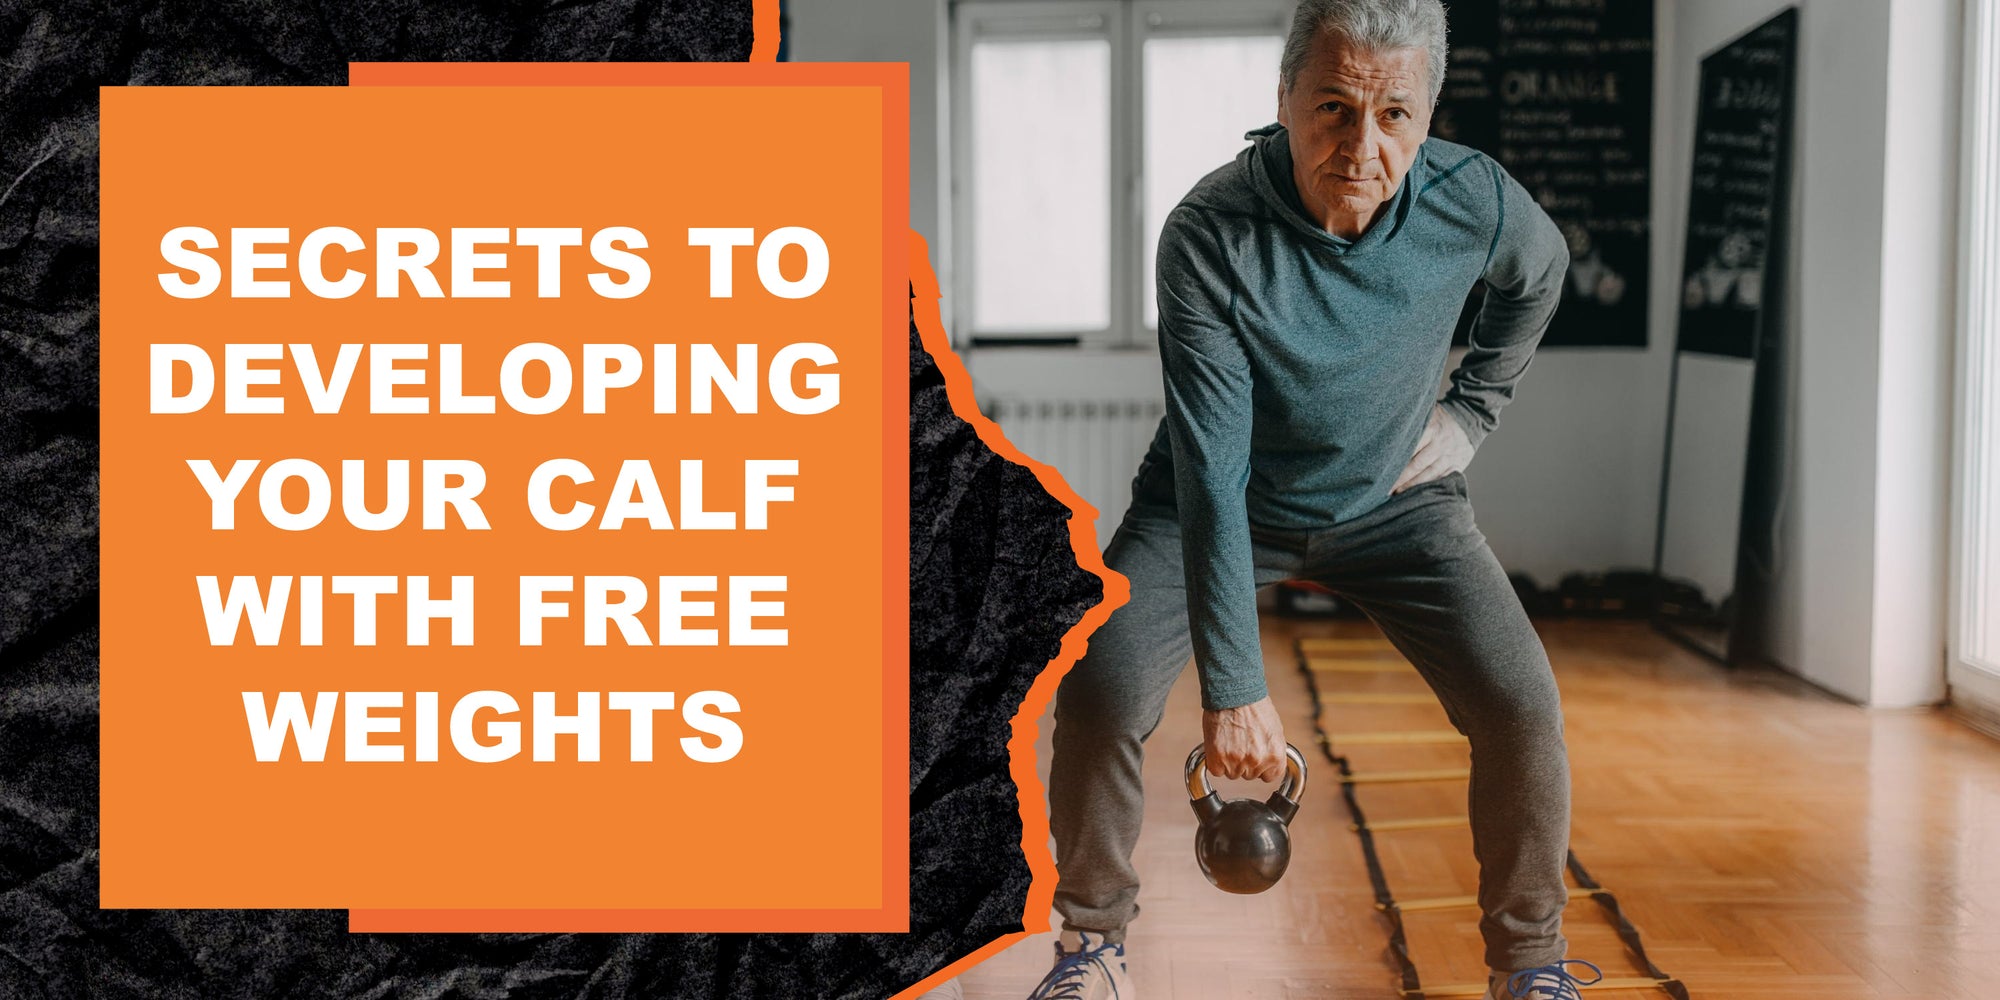 Secrets to Developing Your Calf with Free Weights